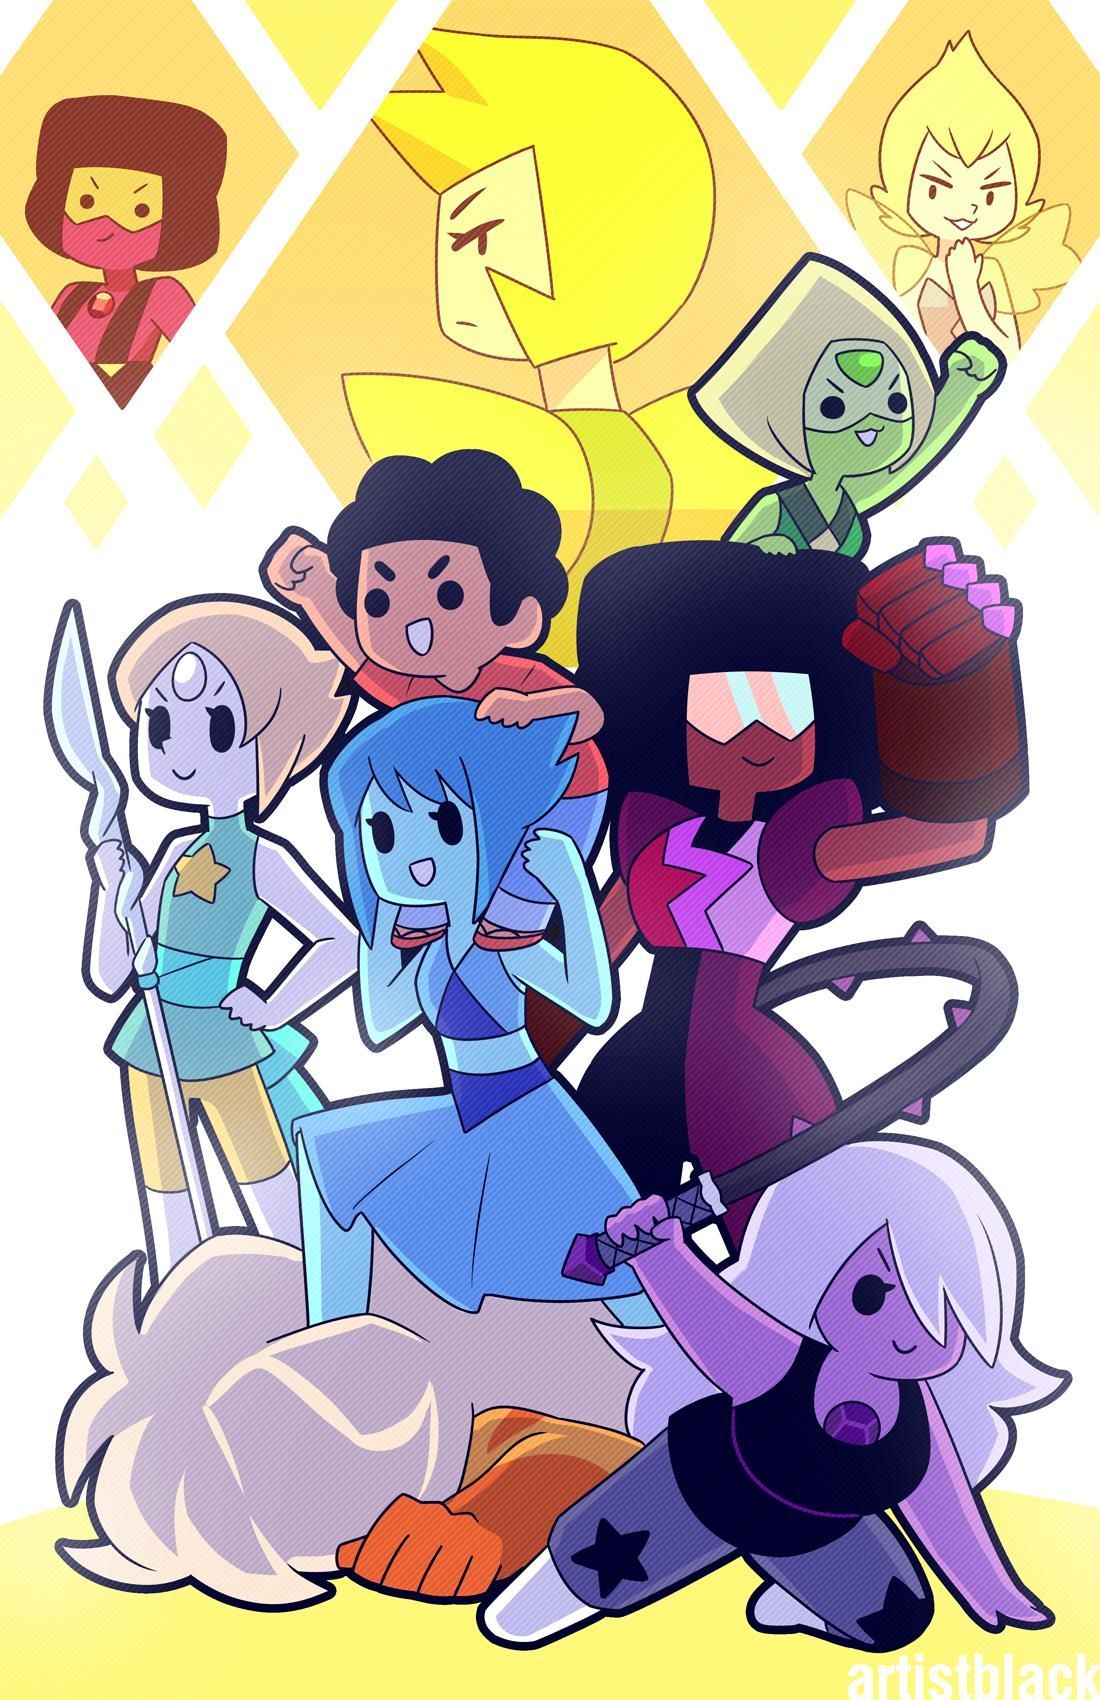 The New Crystal Gems. Amethyst just needs her newest outfit